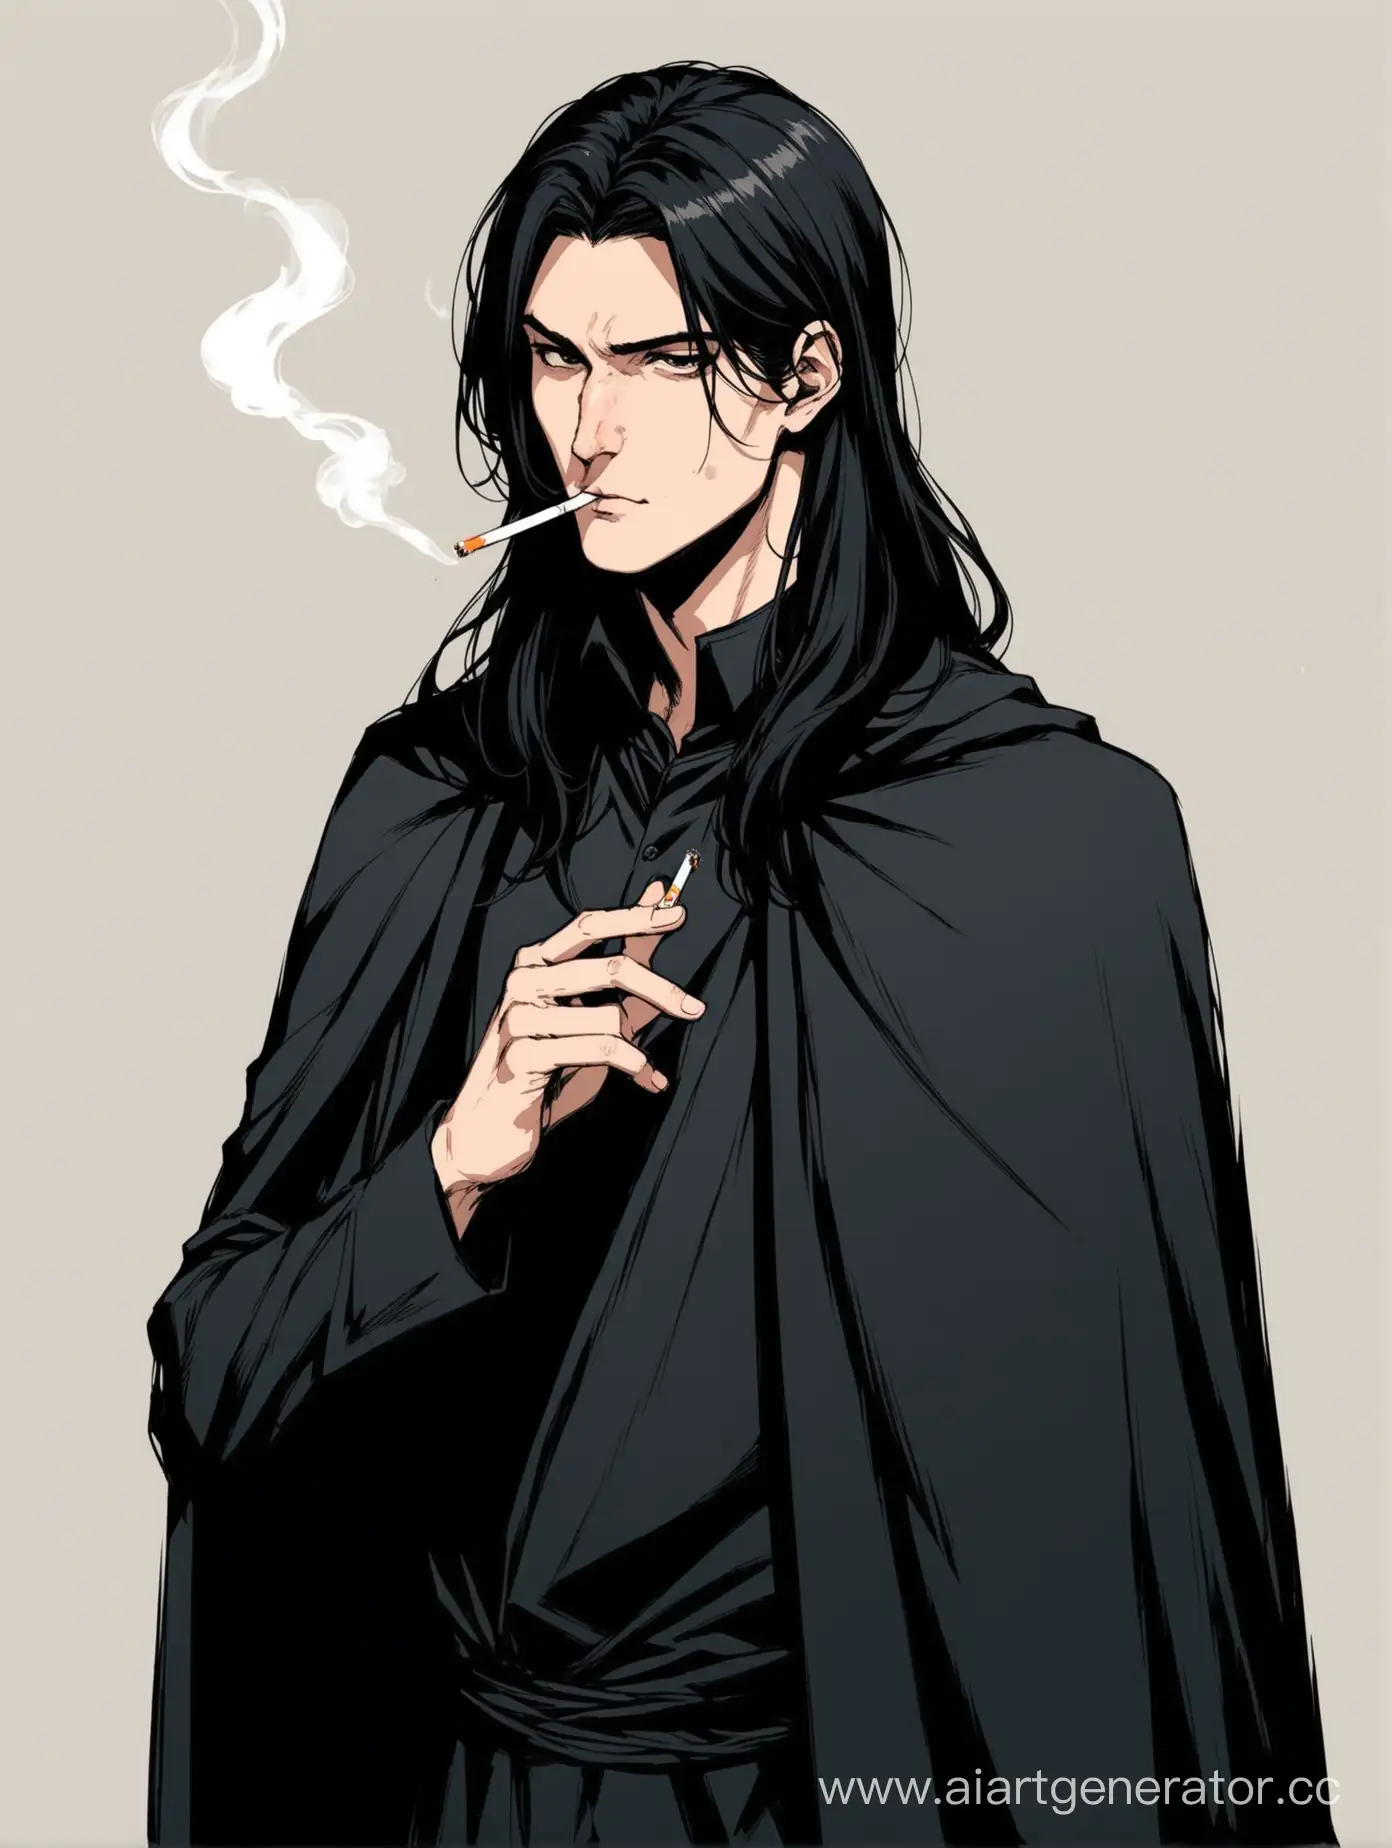 Mysterious-Man-with-Long-Black-Hair-and-Cloak-Smoking-Cigarette